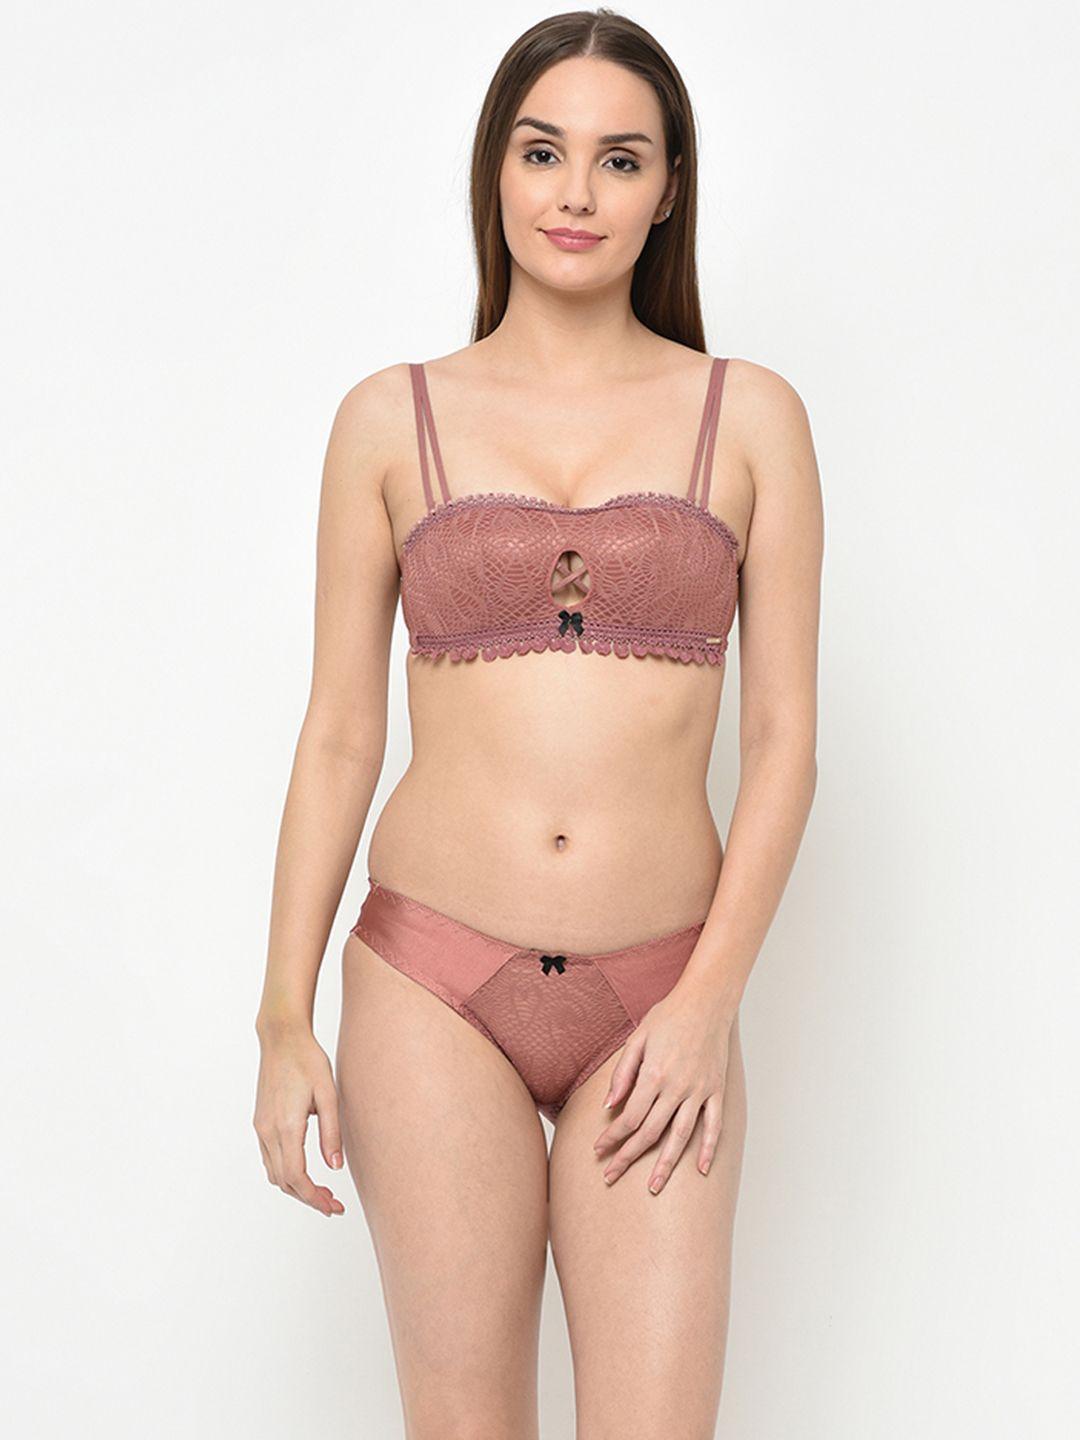 da intimo women peach-coloured lace heavily padded non-wired push up lingerie set di-1255